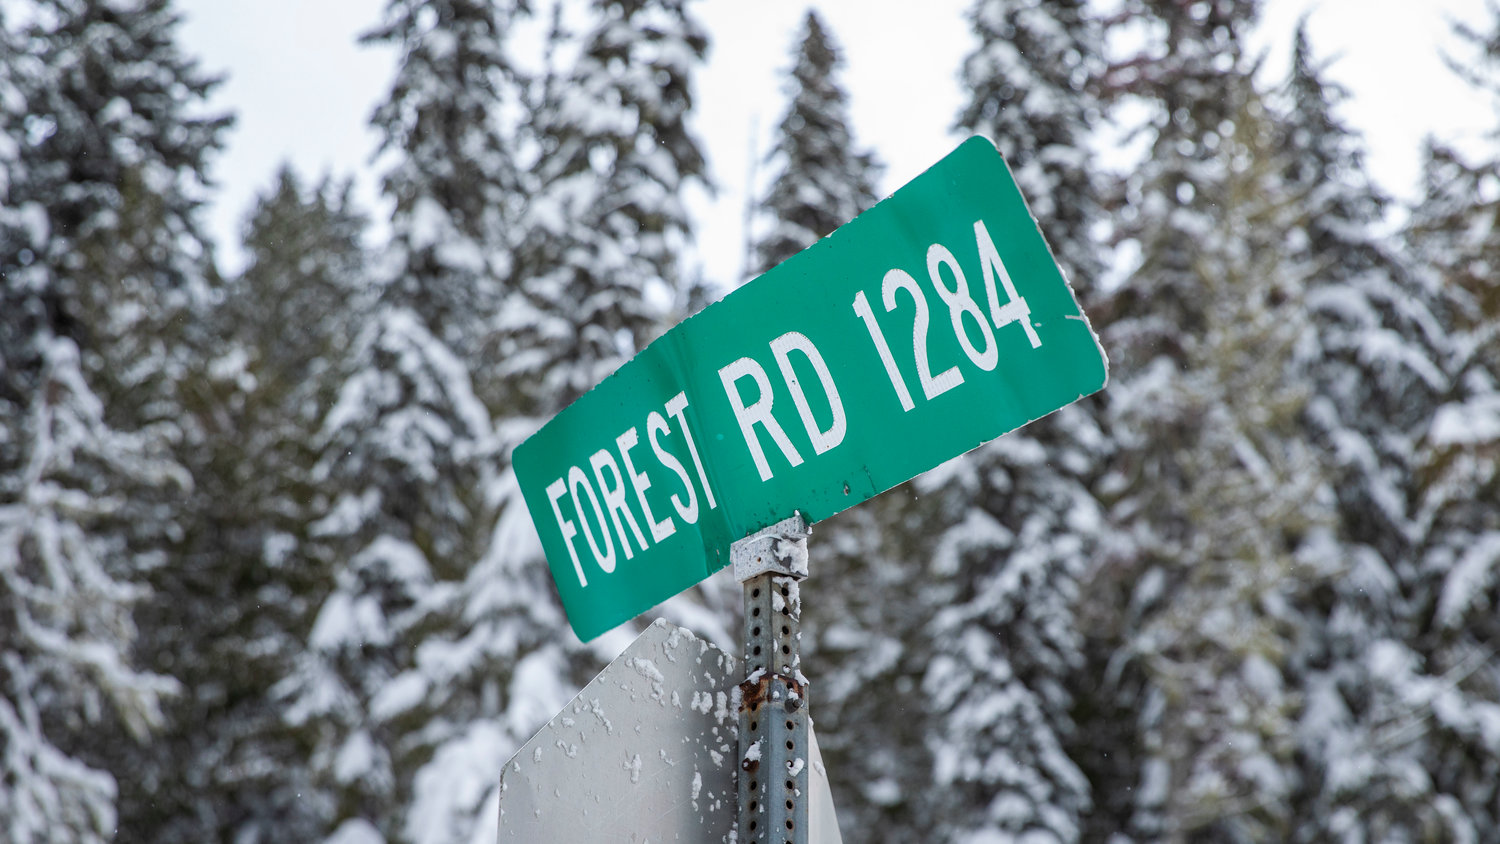 Forest Road 1284 is located on the east end of Lewis County.